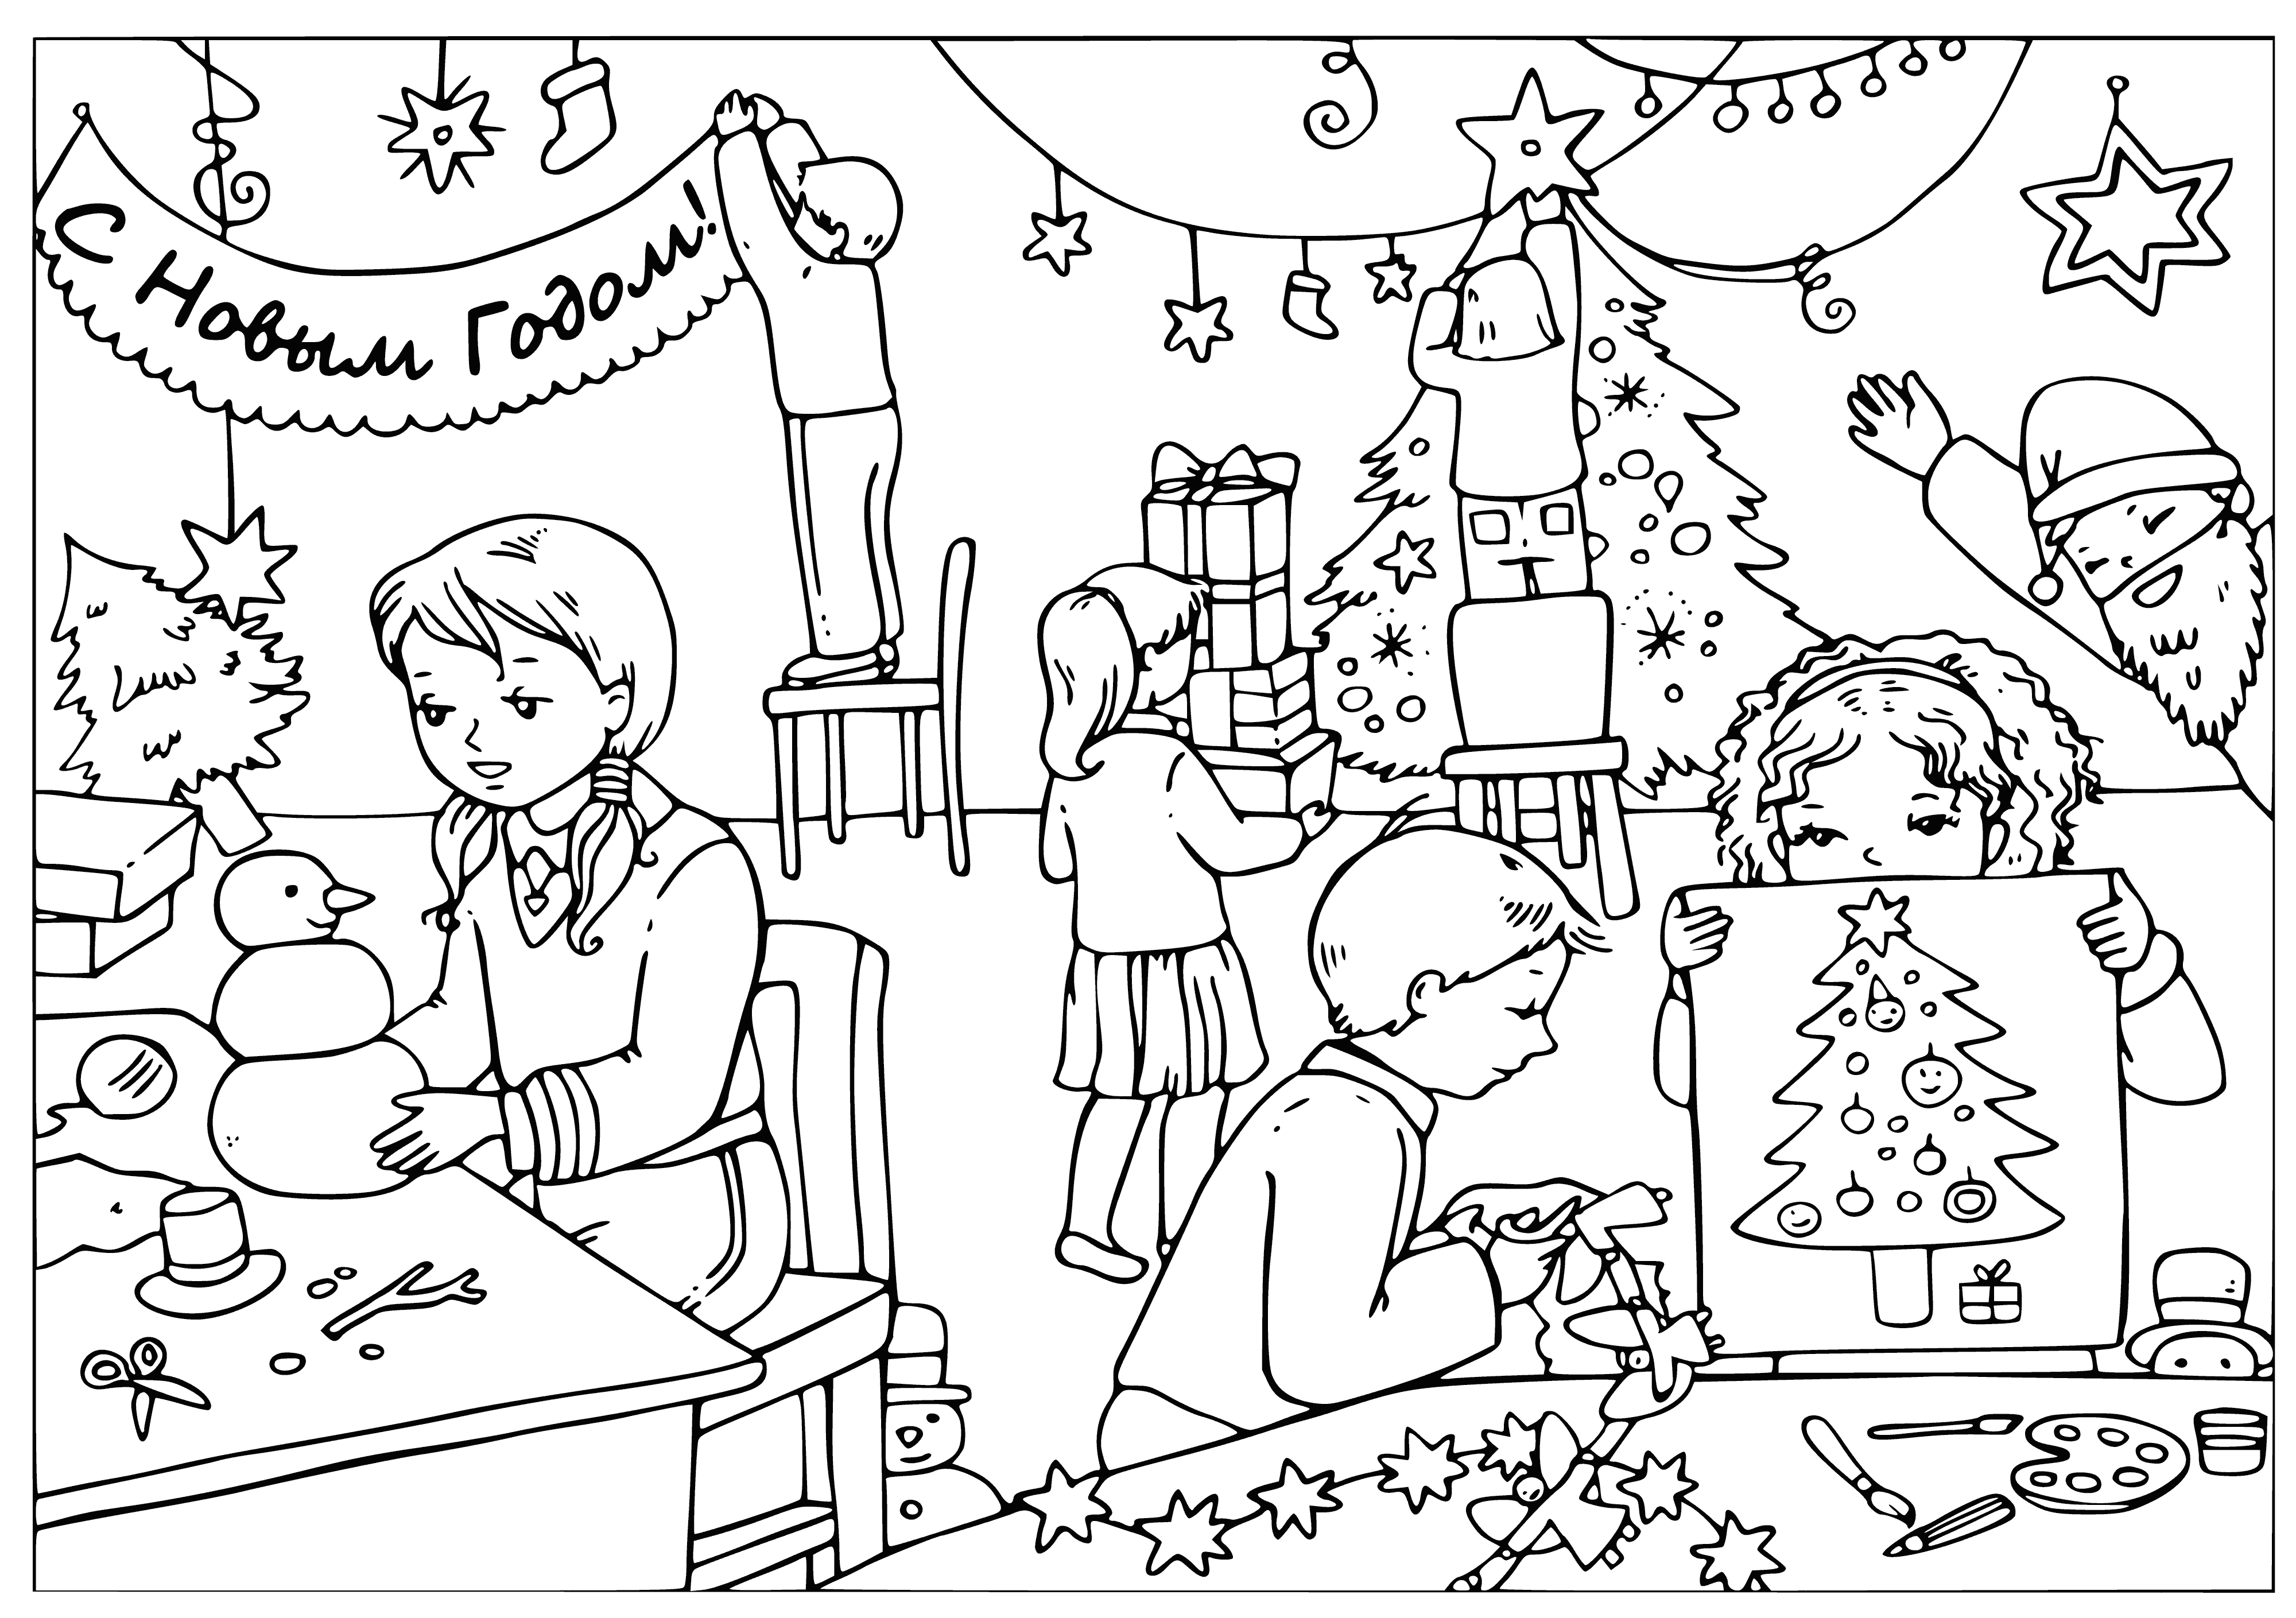 Children are preparing for the New Year coloring page